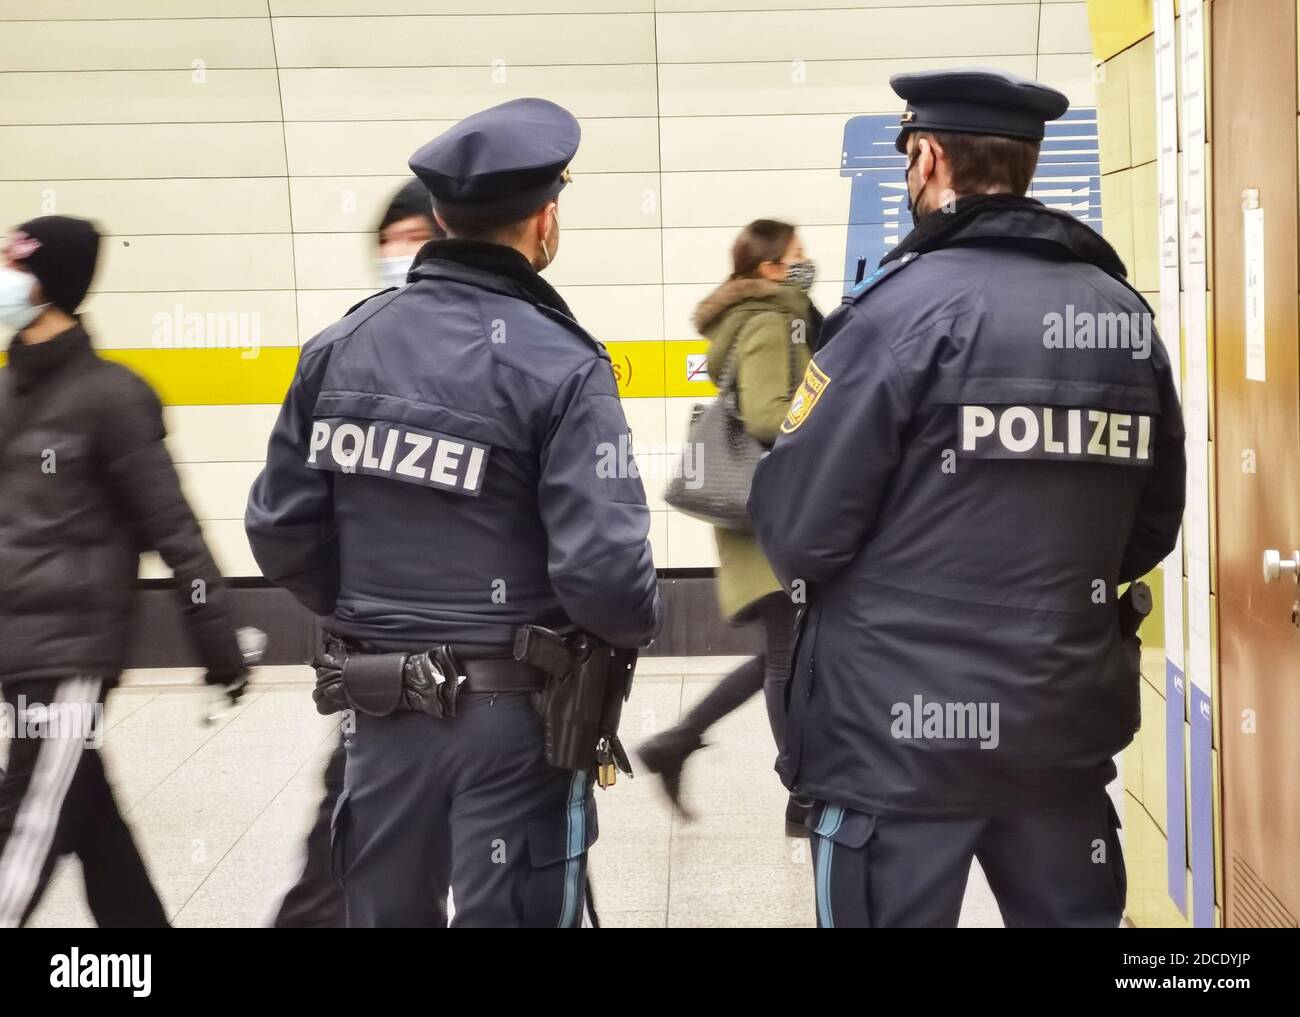 Munich, Bavaria, Germany. 20th Nov, 2020. Examples of mask patrols carried out by police at Munich's Stachus and at the Marienplatz U-Bahn Subway station. Despite the presence of police, large numbers of people in the Fussgaengerzone of the city sinply remove their masks a few meters away from police leaving the zone with close to 50% non-compliance. Credit: Sachelle Babbar/ZUMA Wire/Alamy Live News Stock Photo